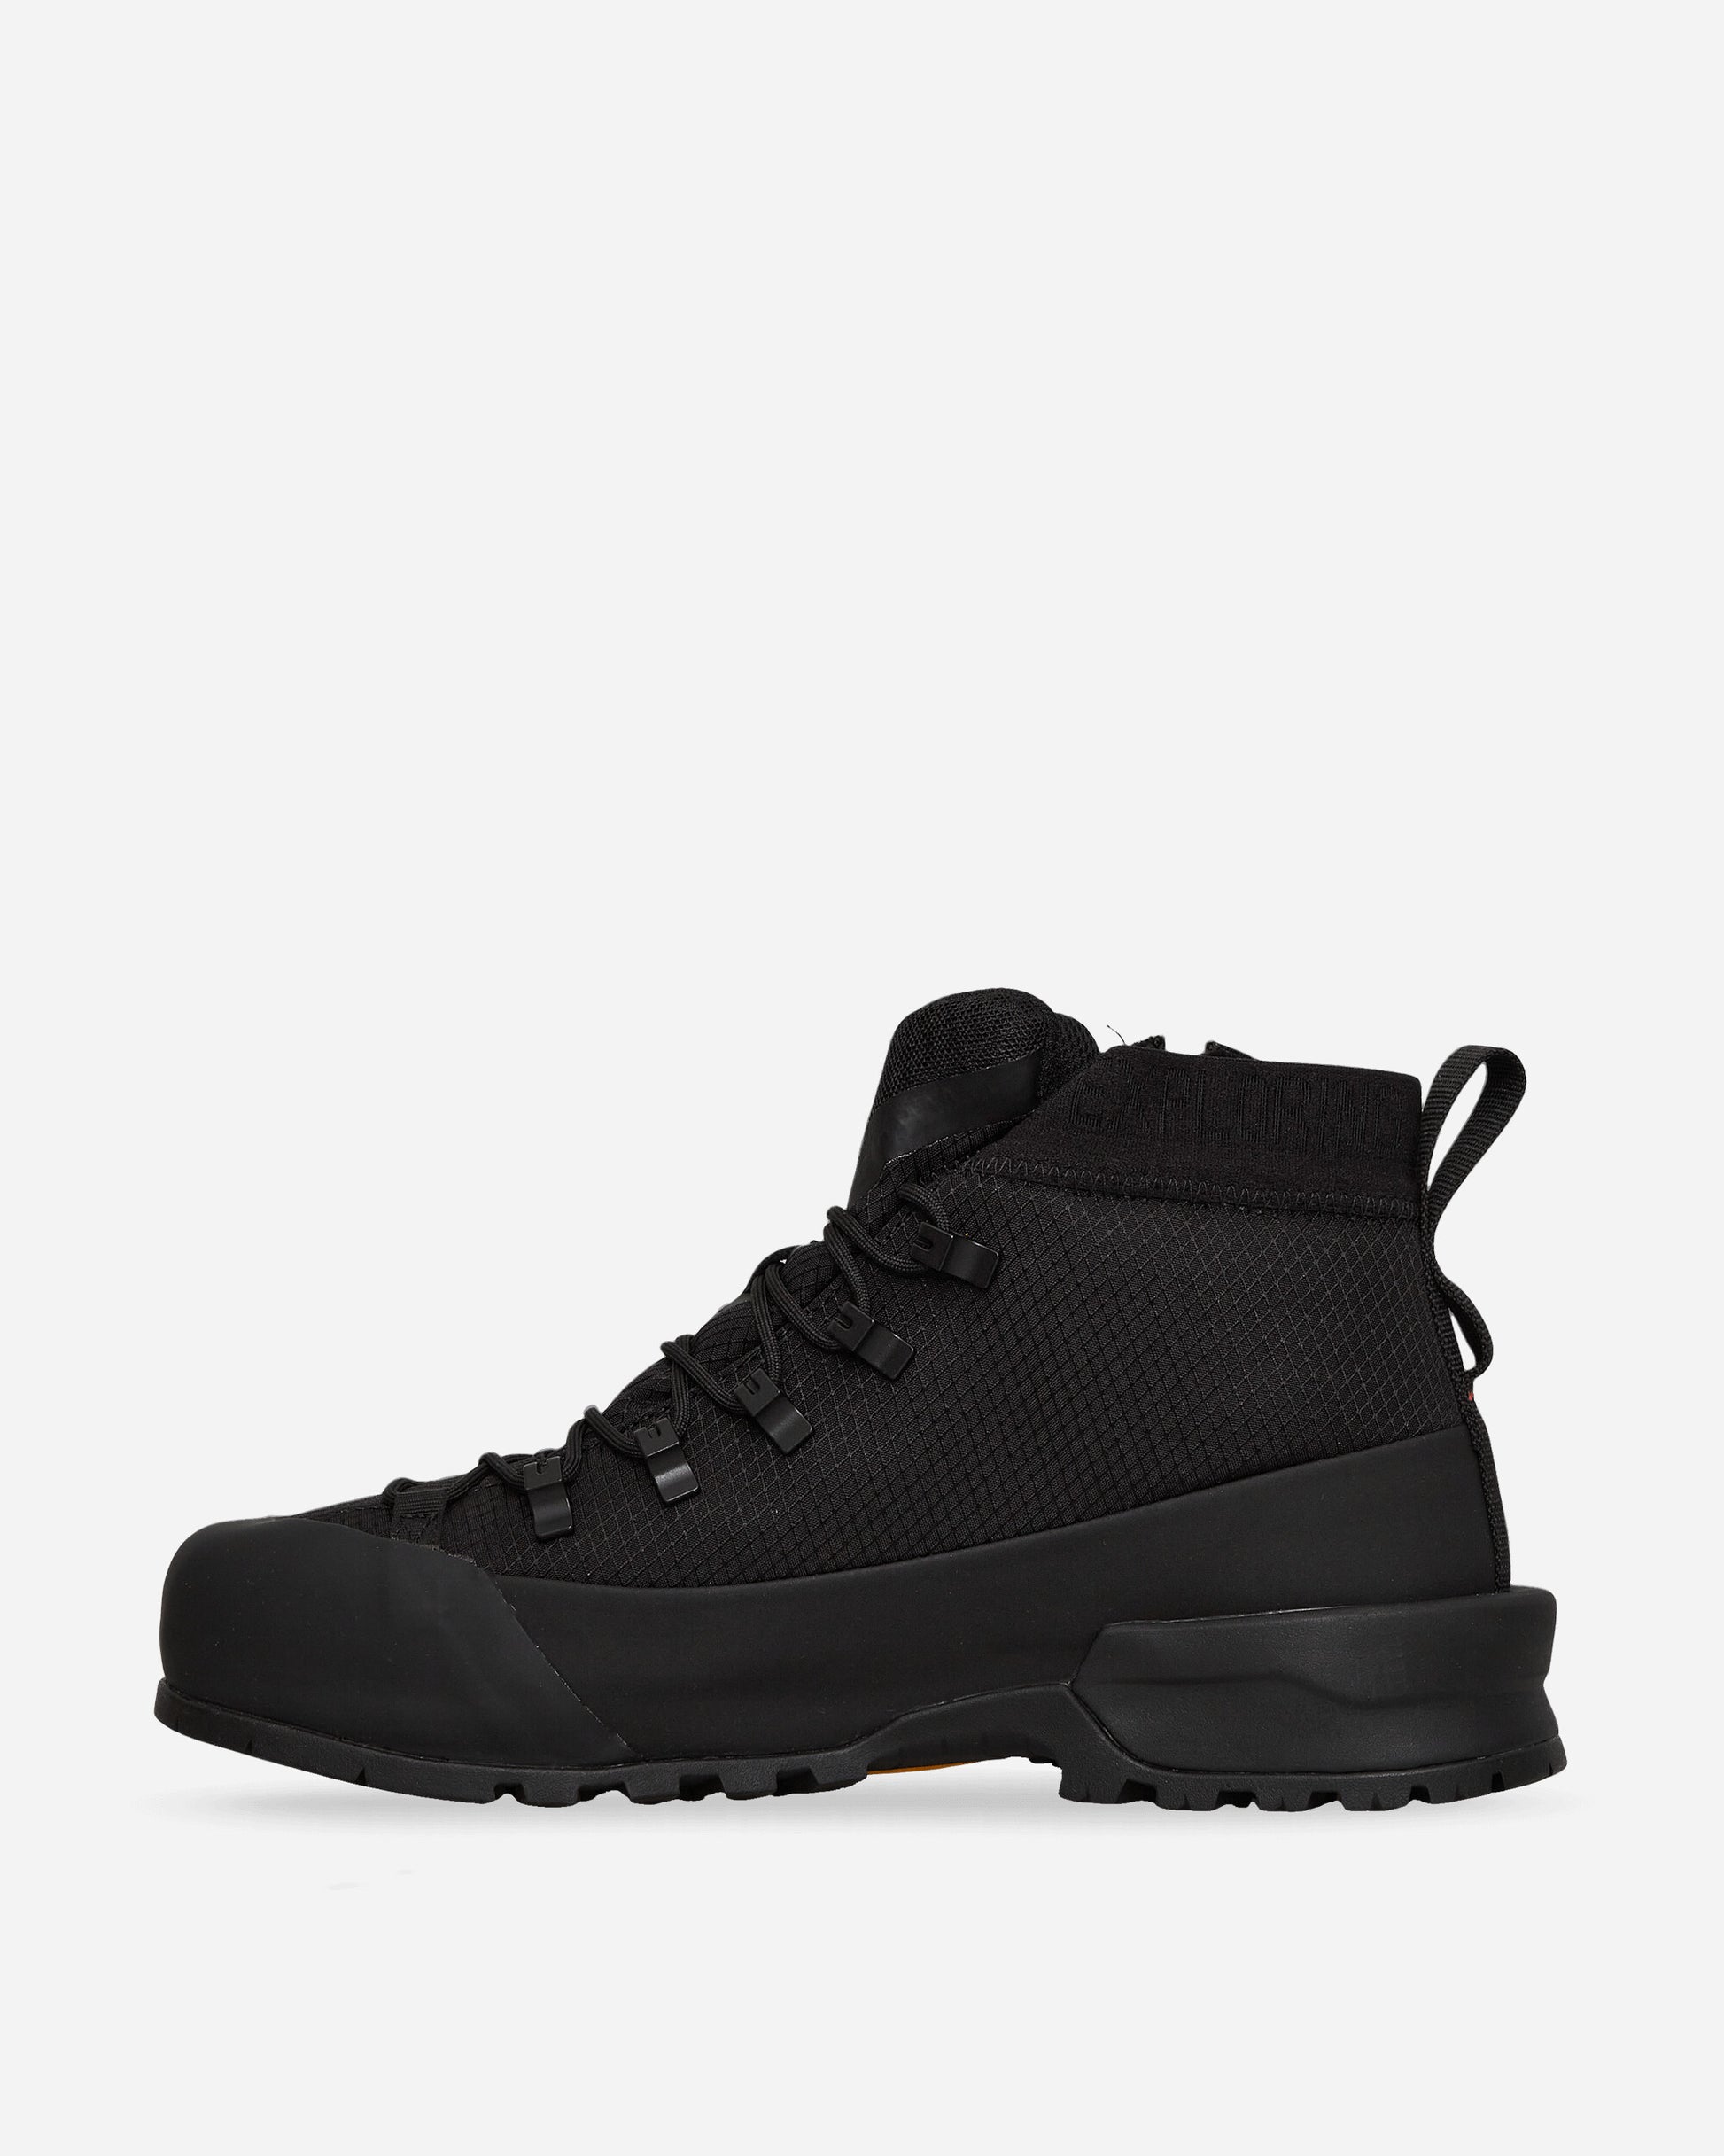 The North Face Glenclyffe Zip Tnf Black/Tnf Black Boots Hiking NF0A817A KX71 